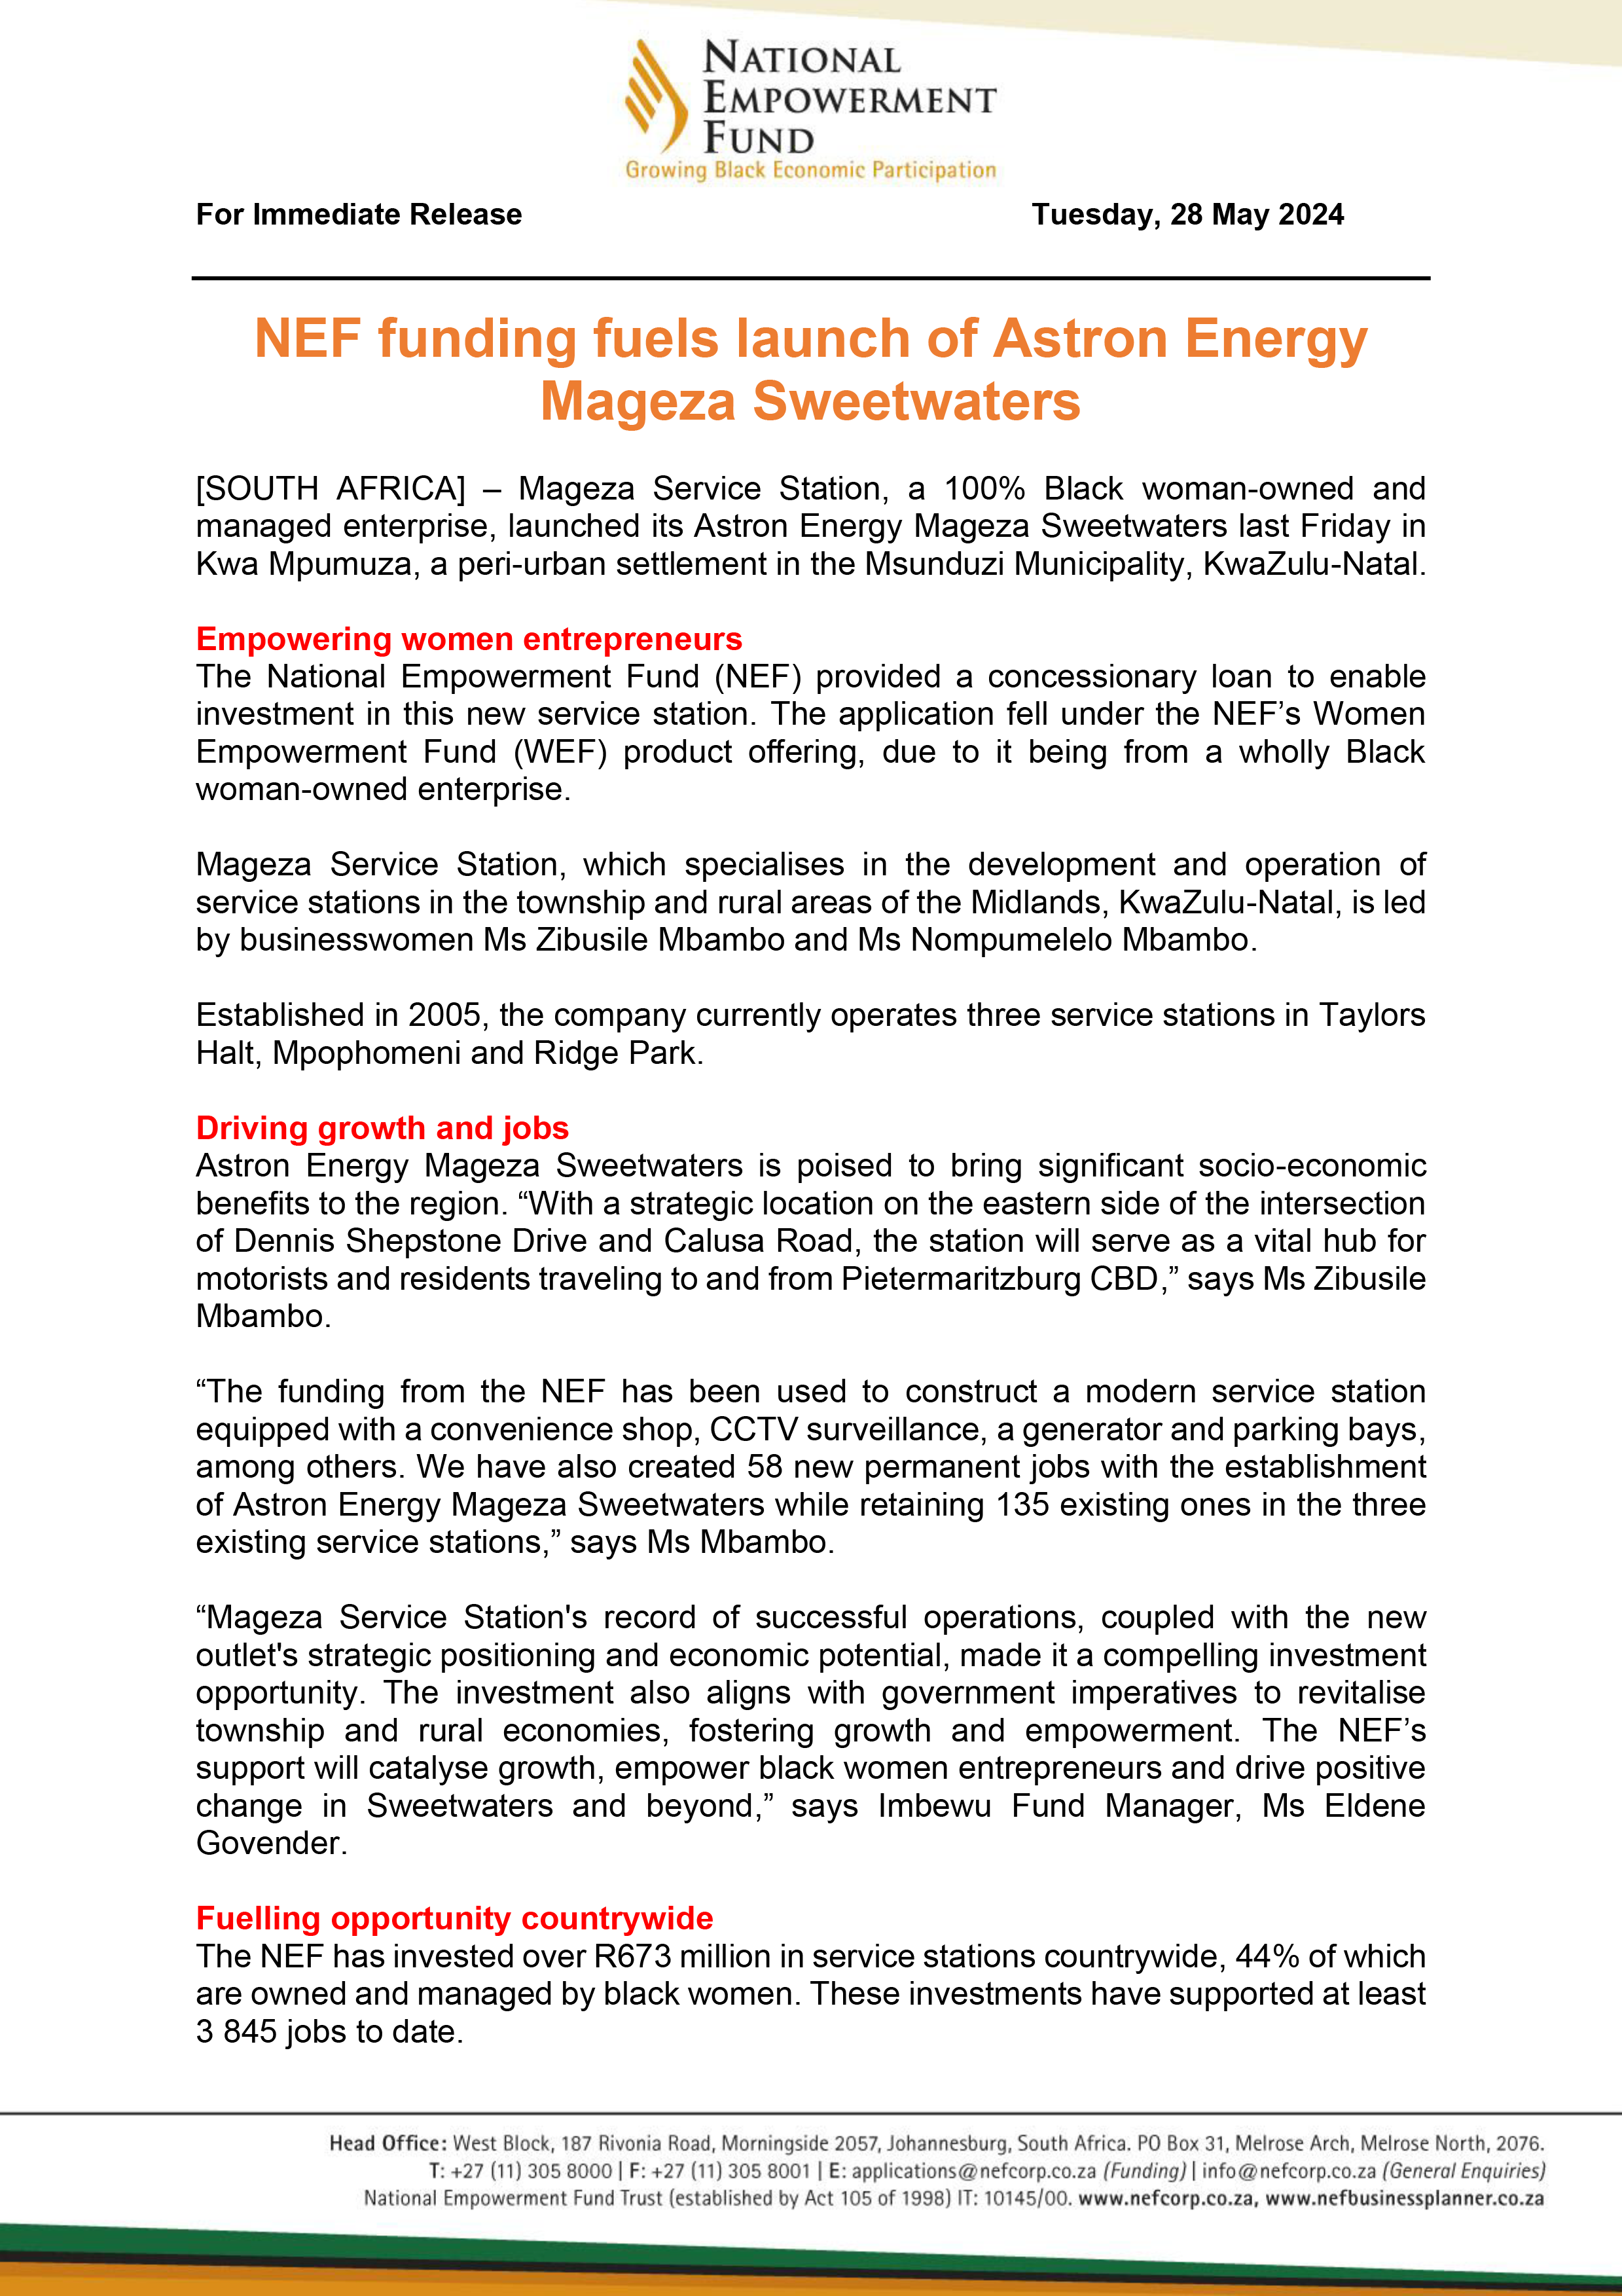 NEF Funding Fuels Launch Of Astron Energy Mageza Sweetwaters